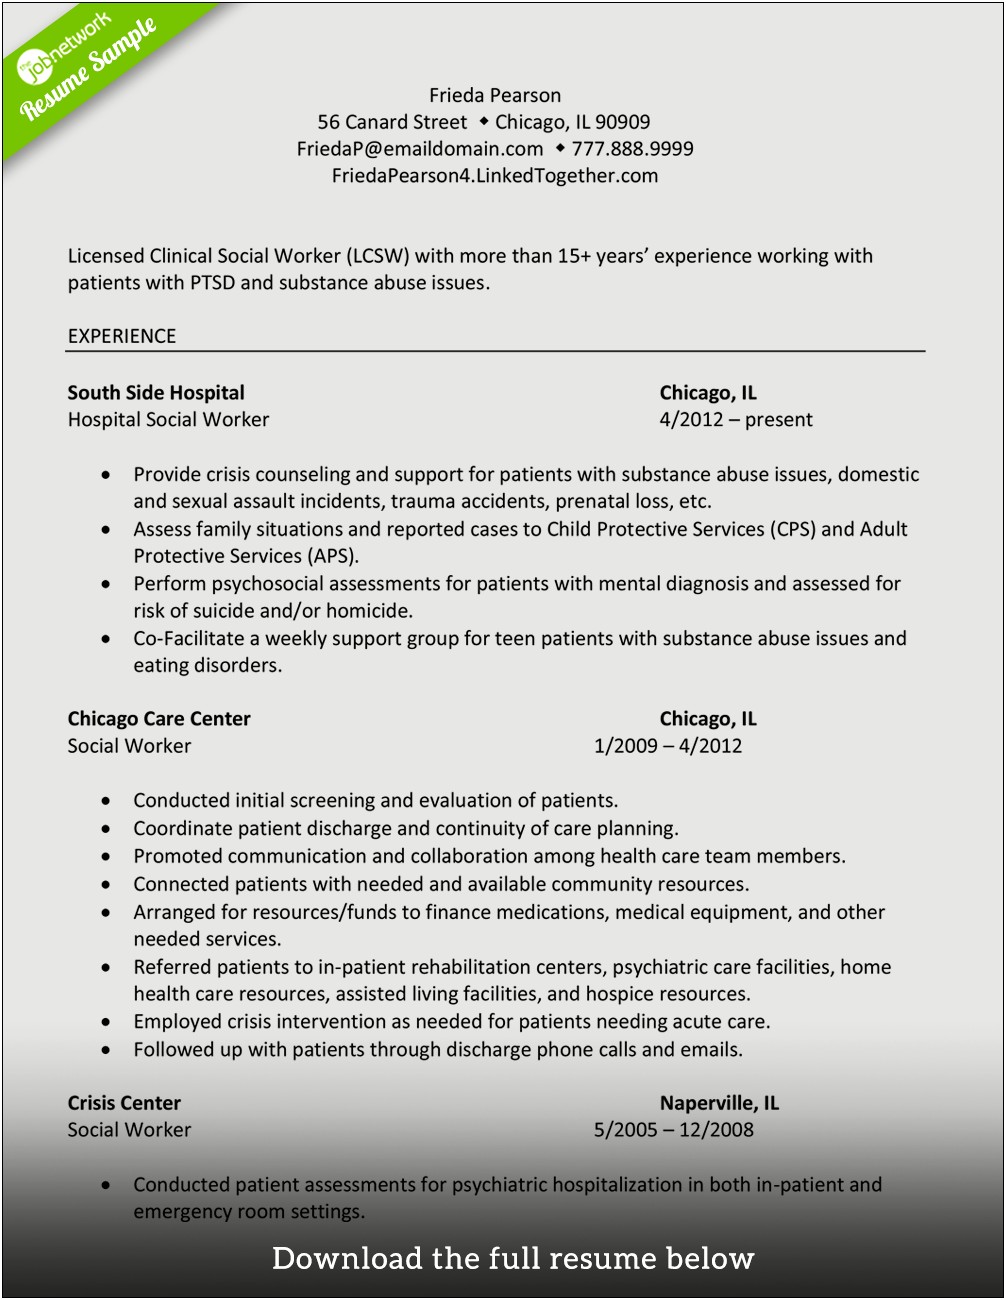 Free Resume Templates For Social Workers